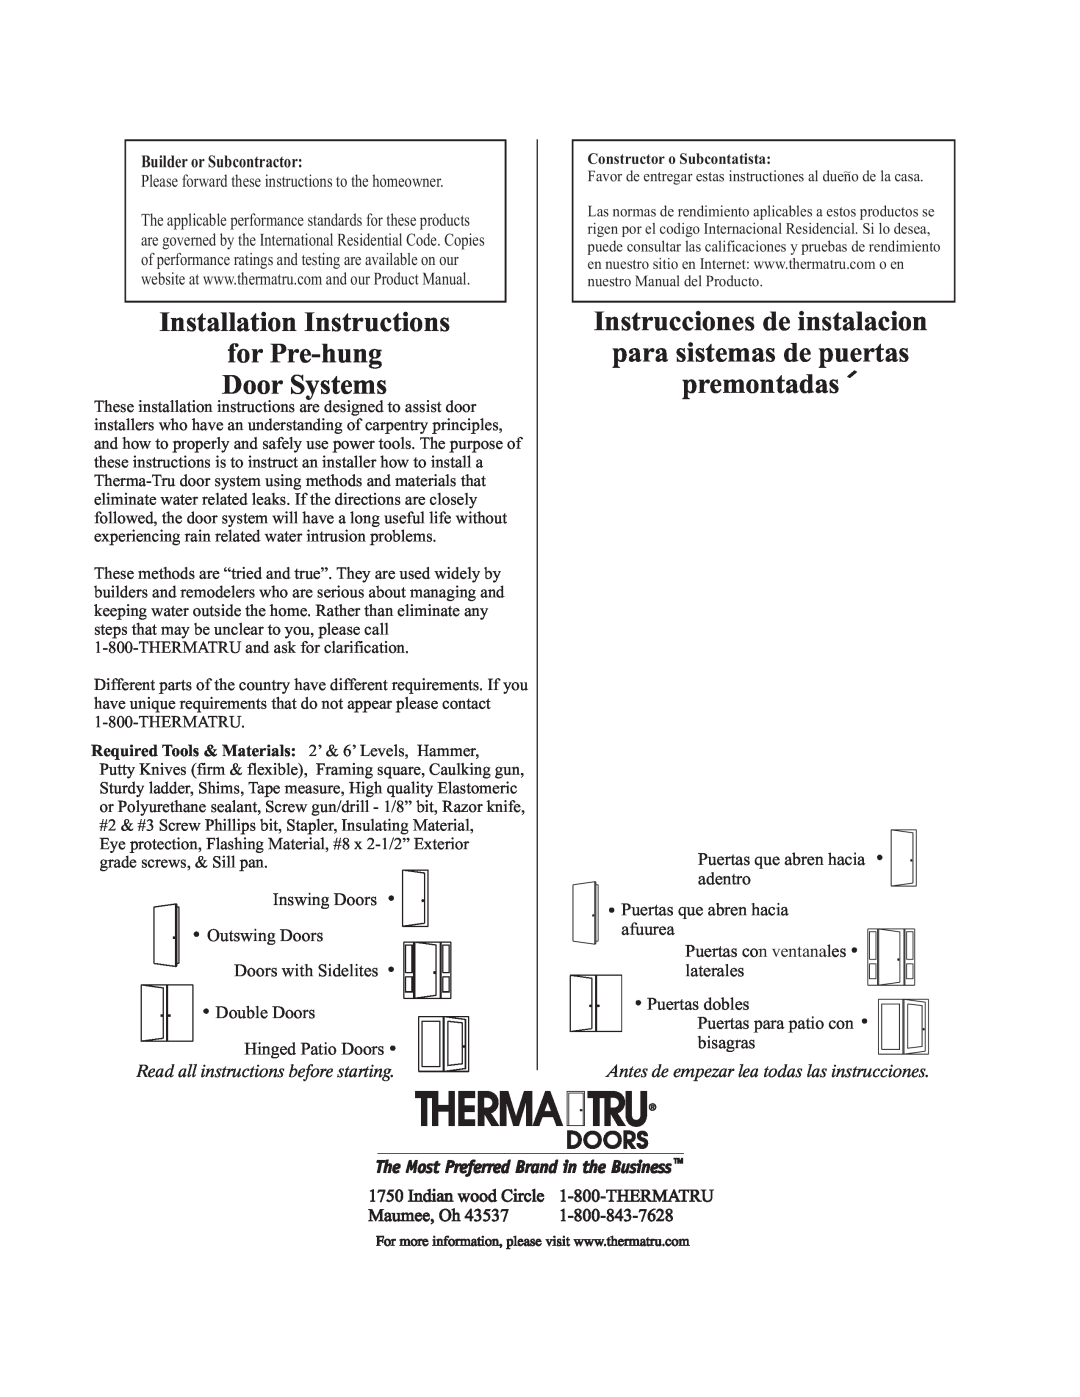 Therma-Tru Pre-hung Door Systems installation instructions Installation Instructions for Pre-hung, Indian wood Circle 